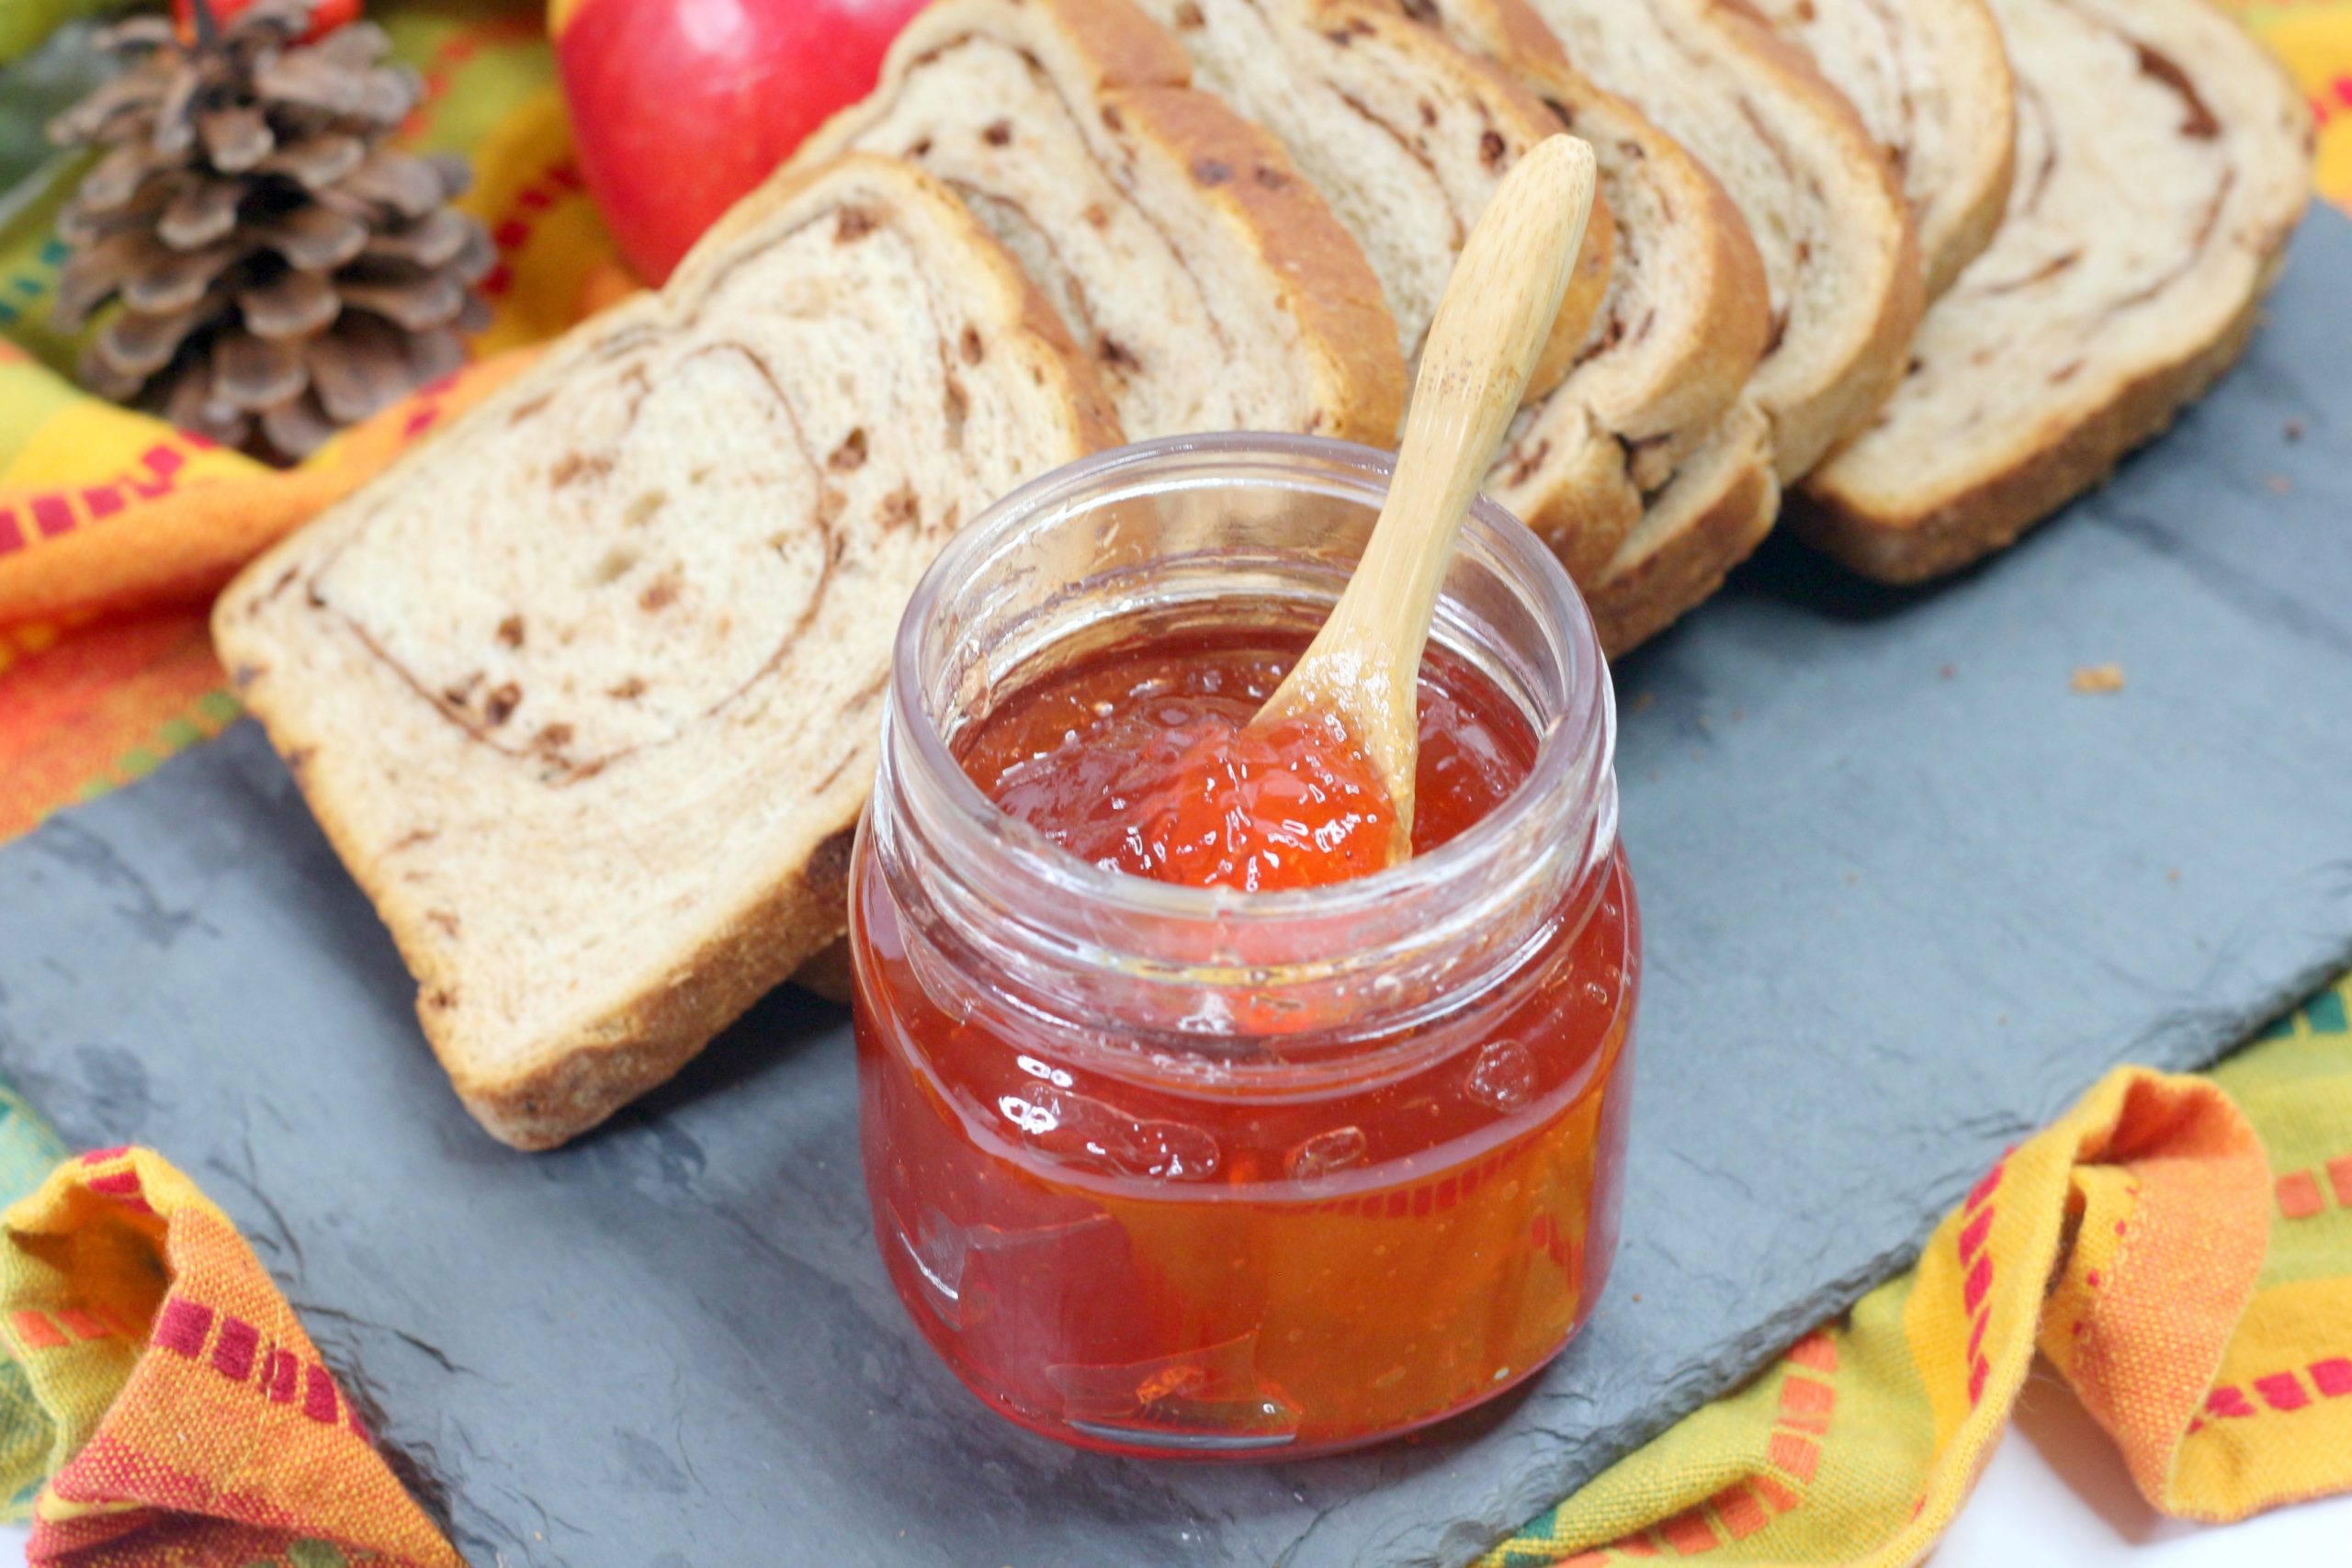 Spiced Apple Cider Jelly